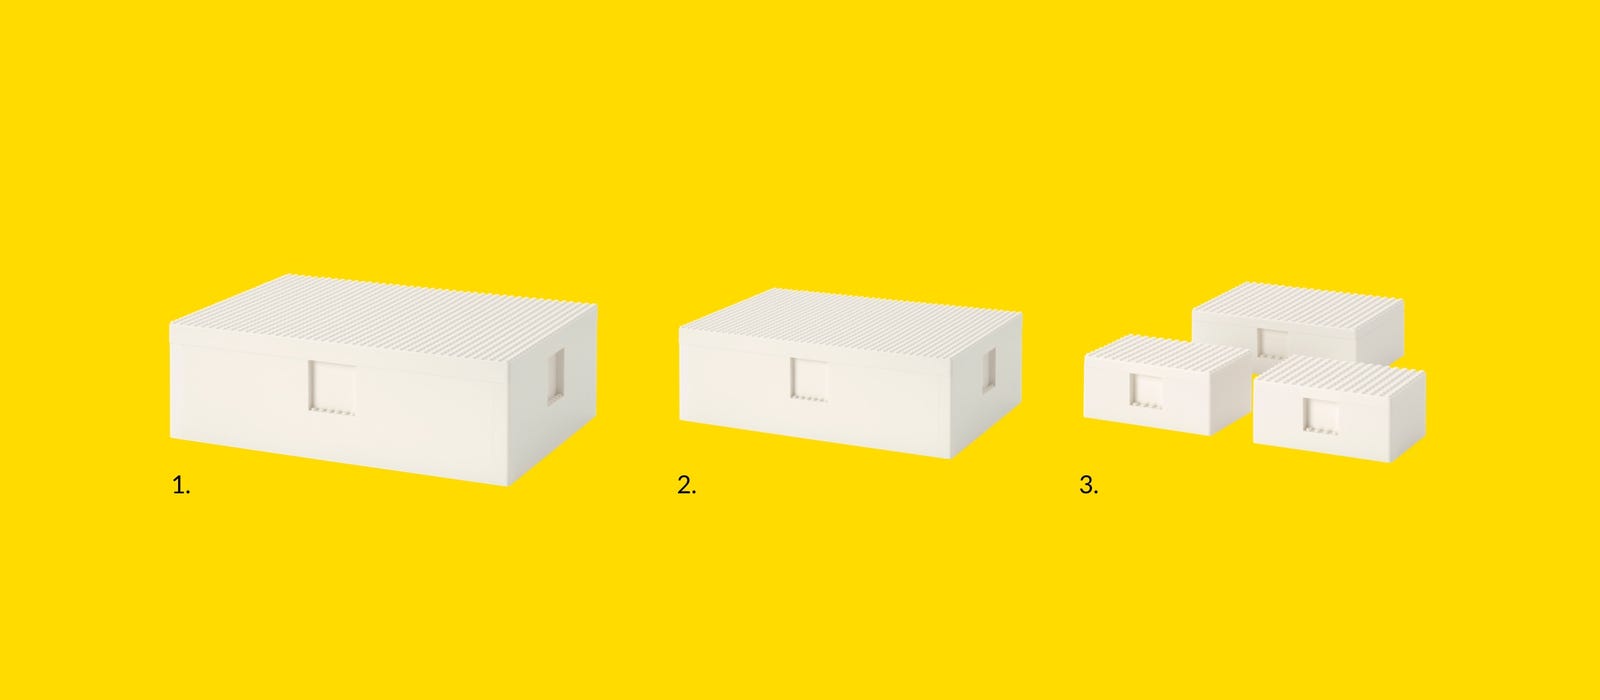 IKEA and Lego release Bygglek storage boxes that double as toys